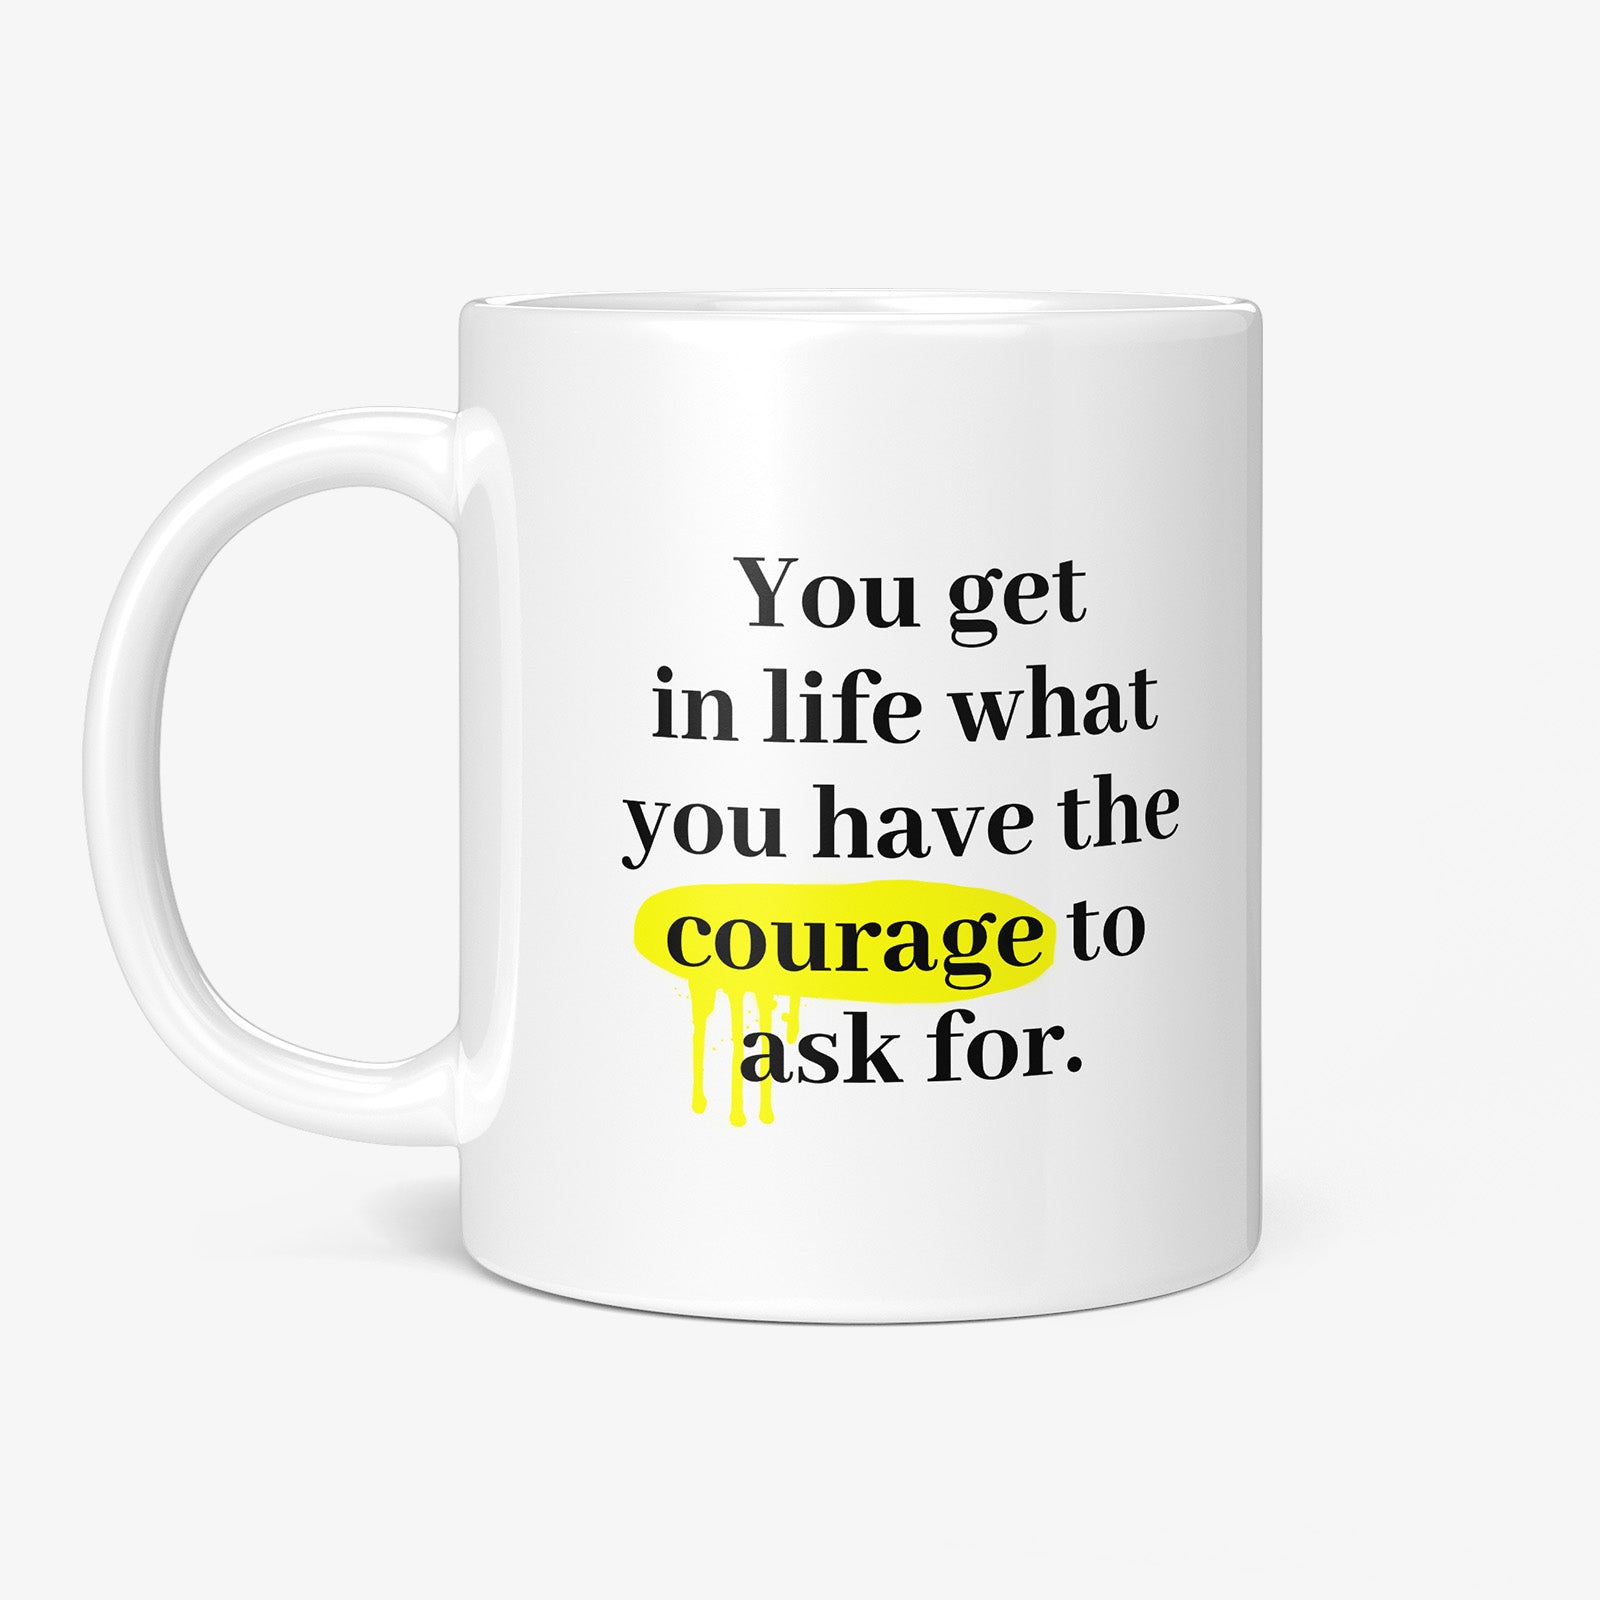 Be inspired by Oprah Winfrey's famous quote, "You get in life what you have the courage to ask for" on this white and glossy 11oz coffee mug with the handle on the left.